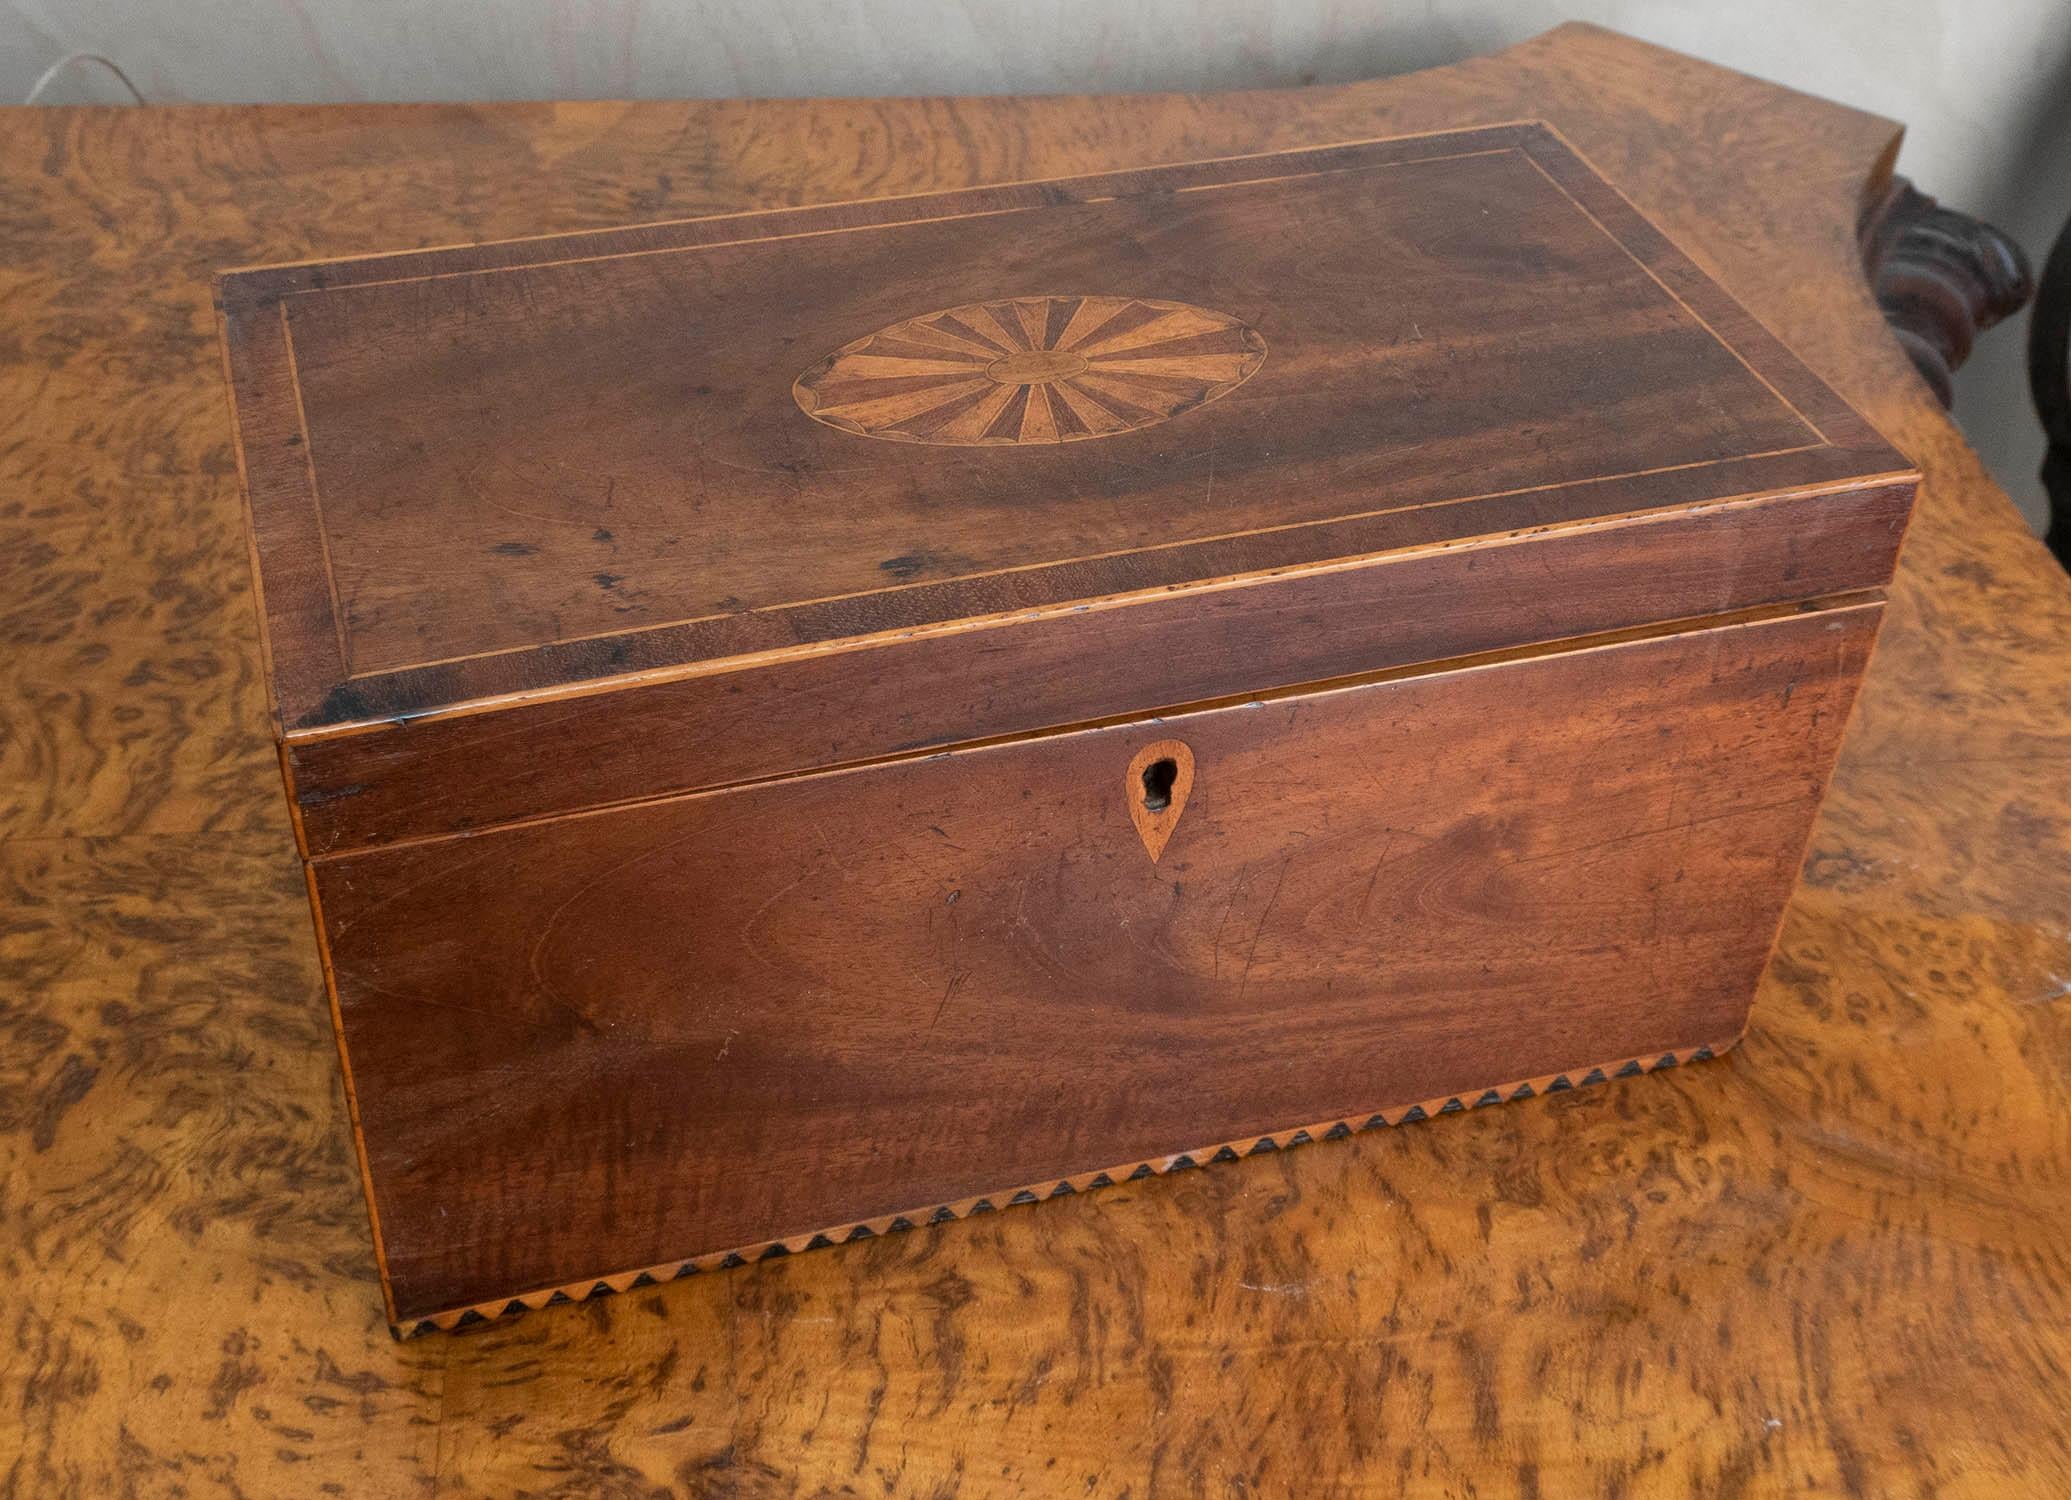 A wonderful tropical hardwood tea caddy. 

Very good quality inlay

Good condition. No missing pieces of inlay

3 compartments with lids

Original patina. Not re-polished

Free UK shipping

  